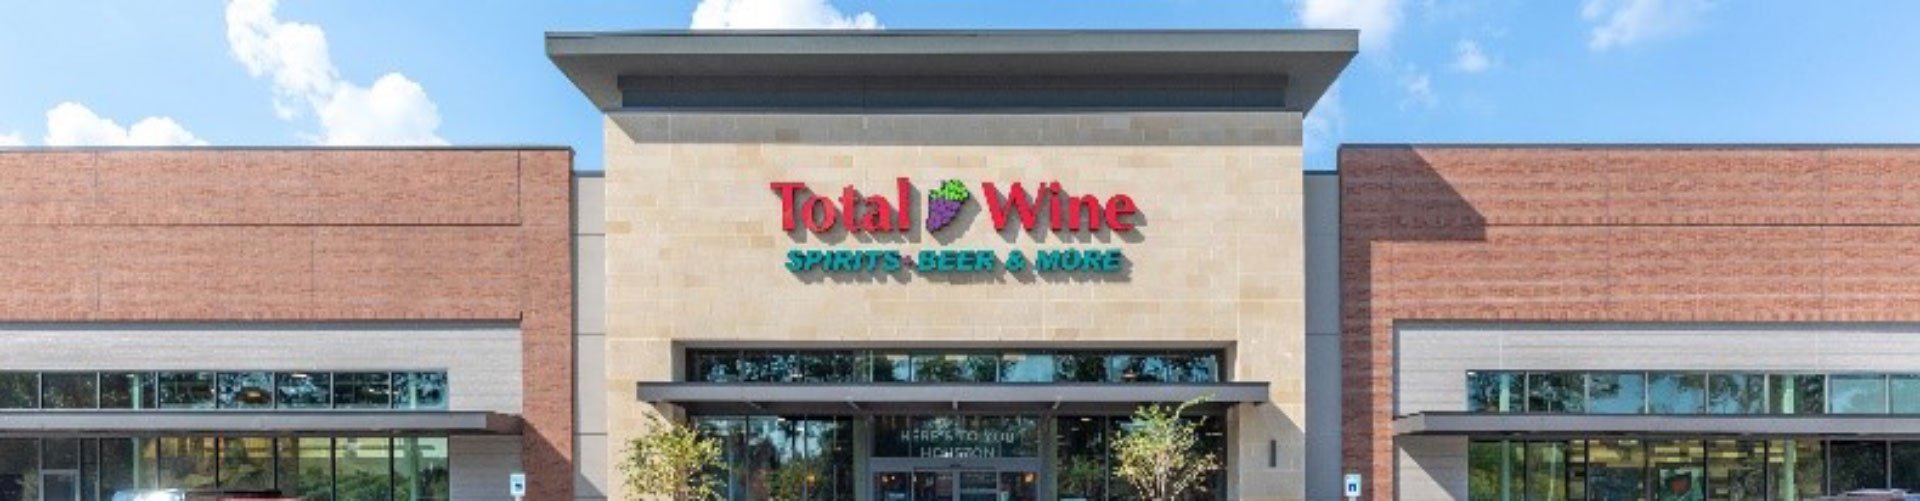 Alcohol Delivery Near Me Houston, Texas Total Wine & More